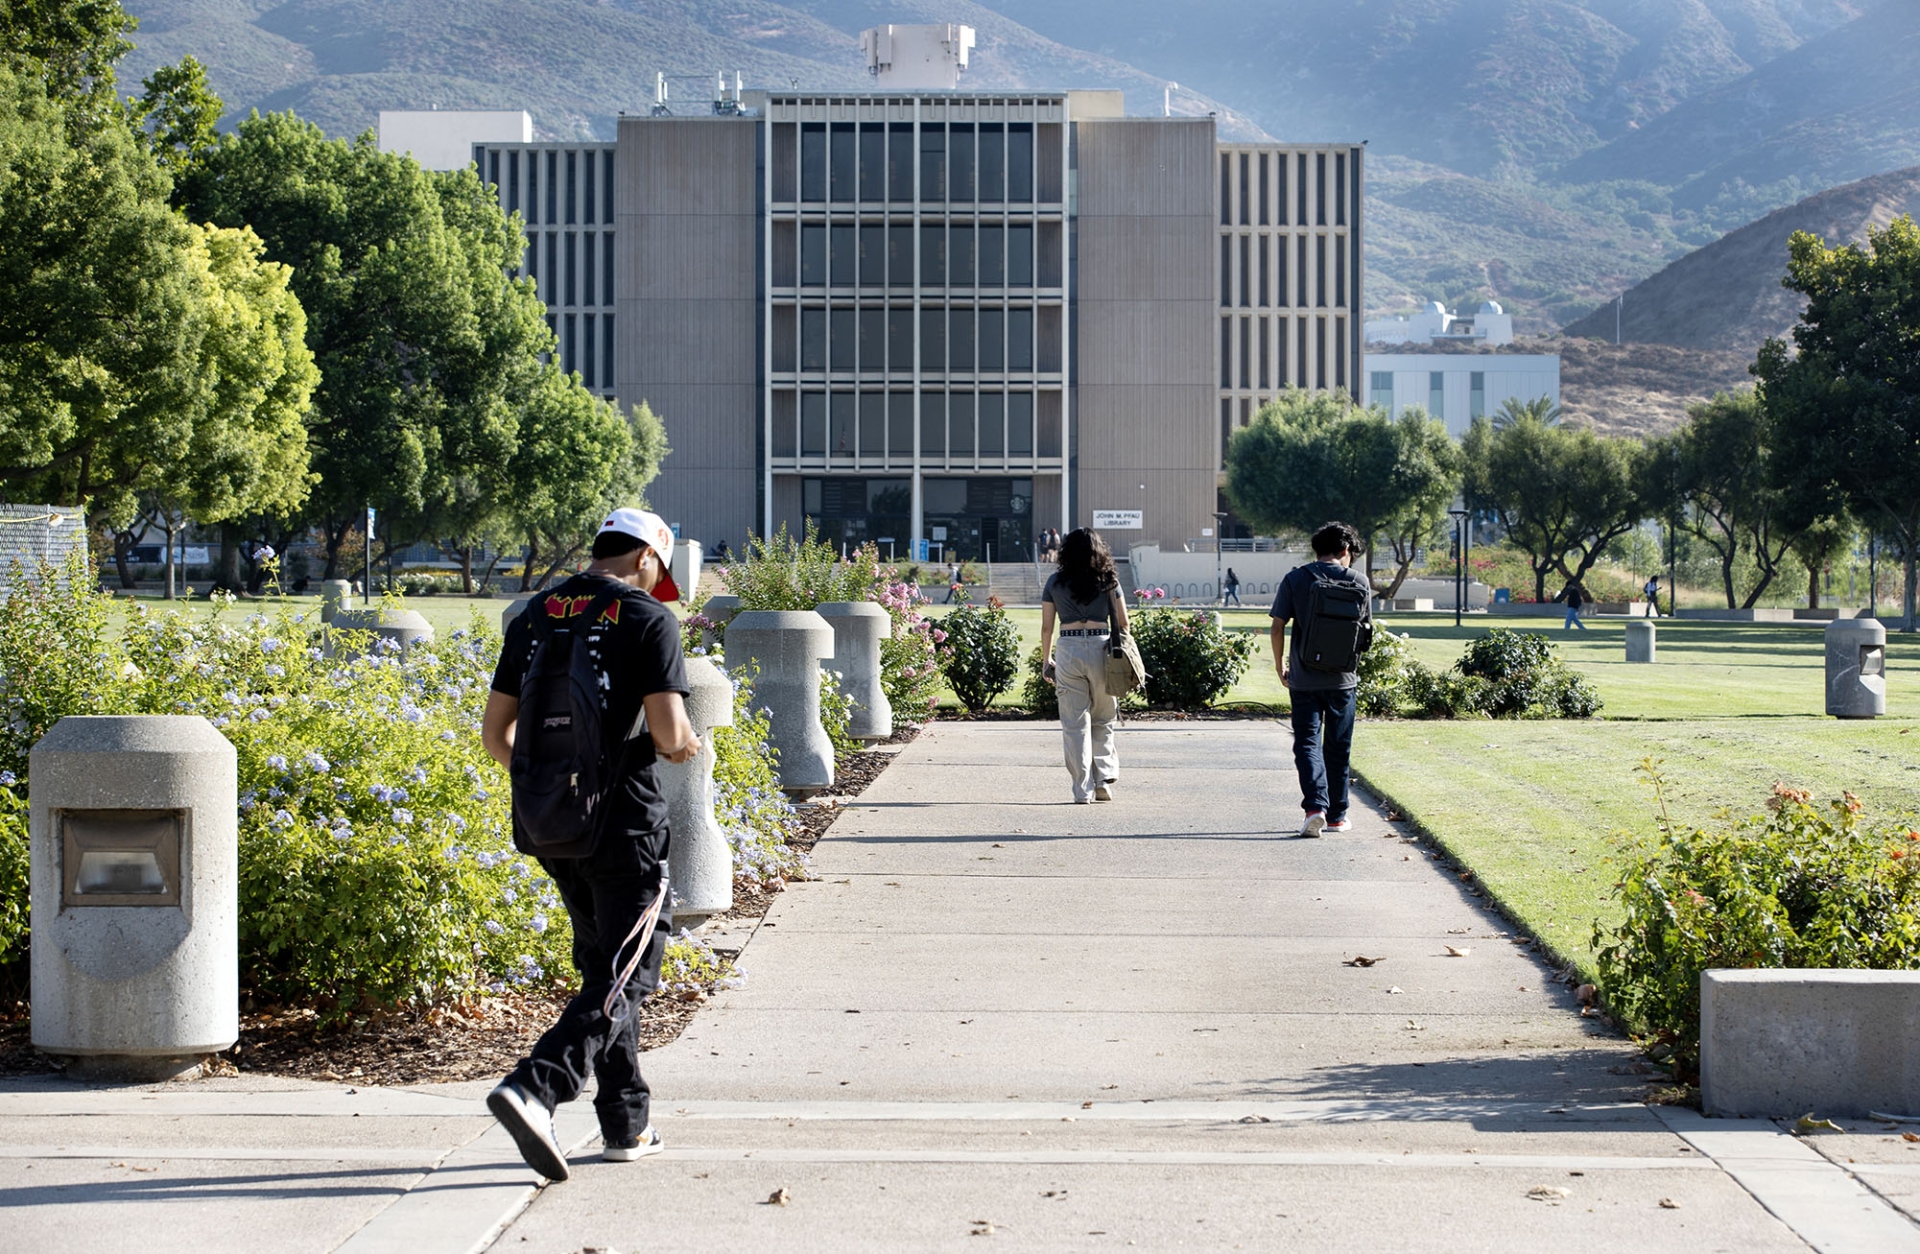 The walkway along the university Pfau Library lawn, with the library, Murillo Family Observatory and the San Bernardino Mountain foothills in the background.